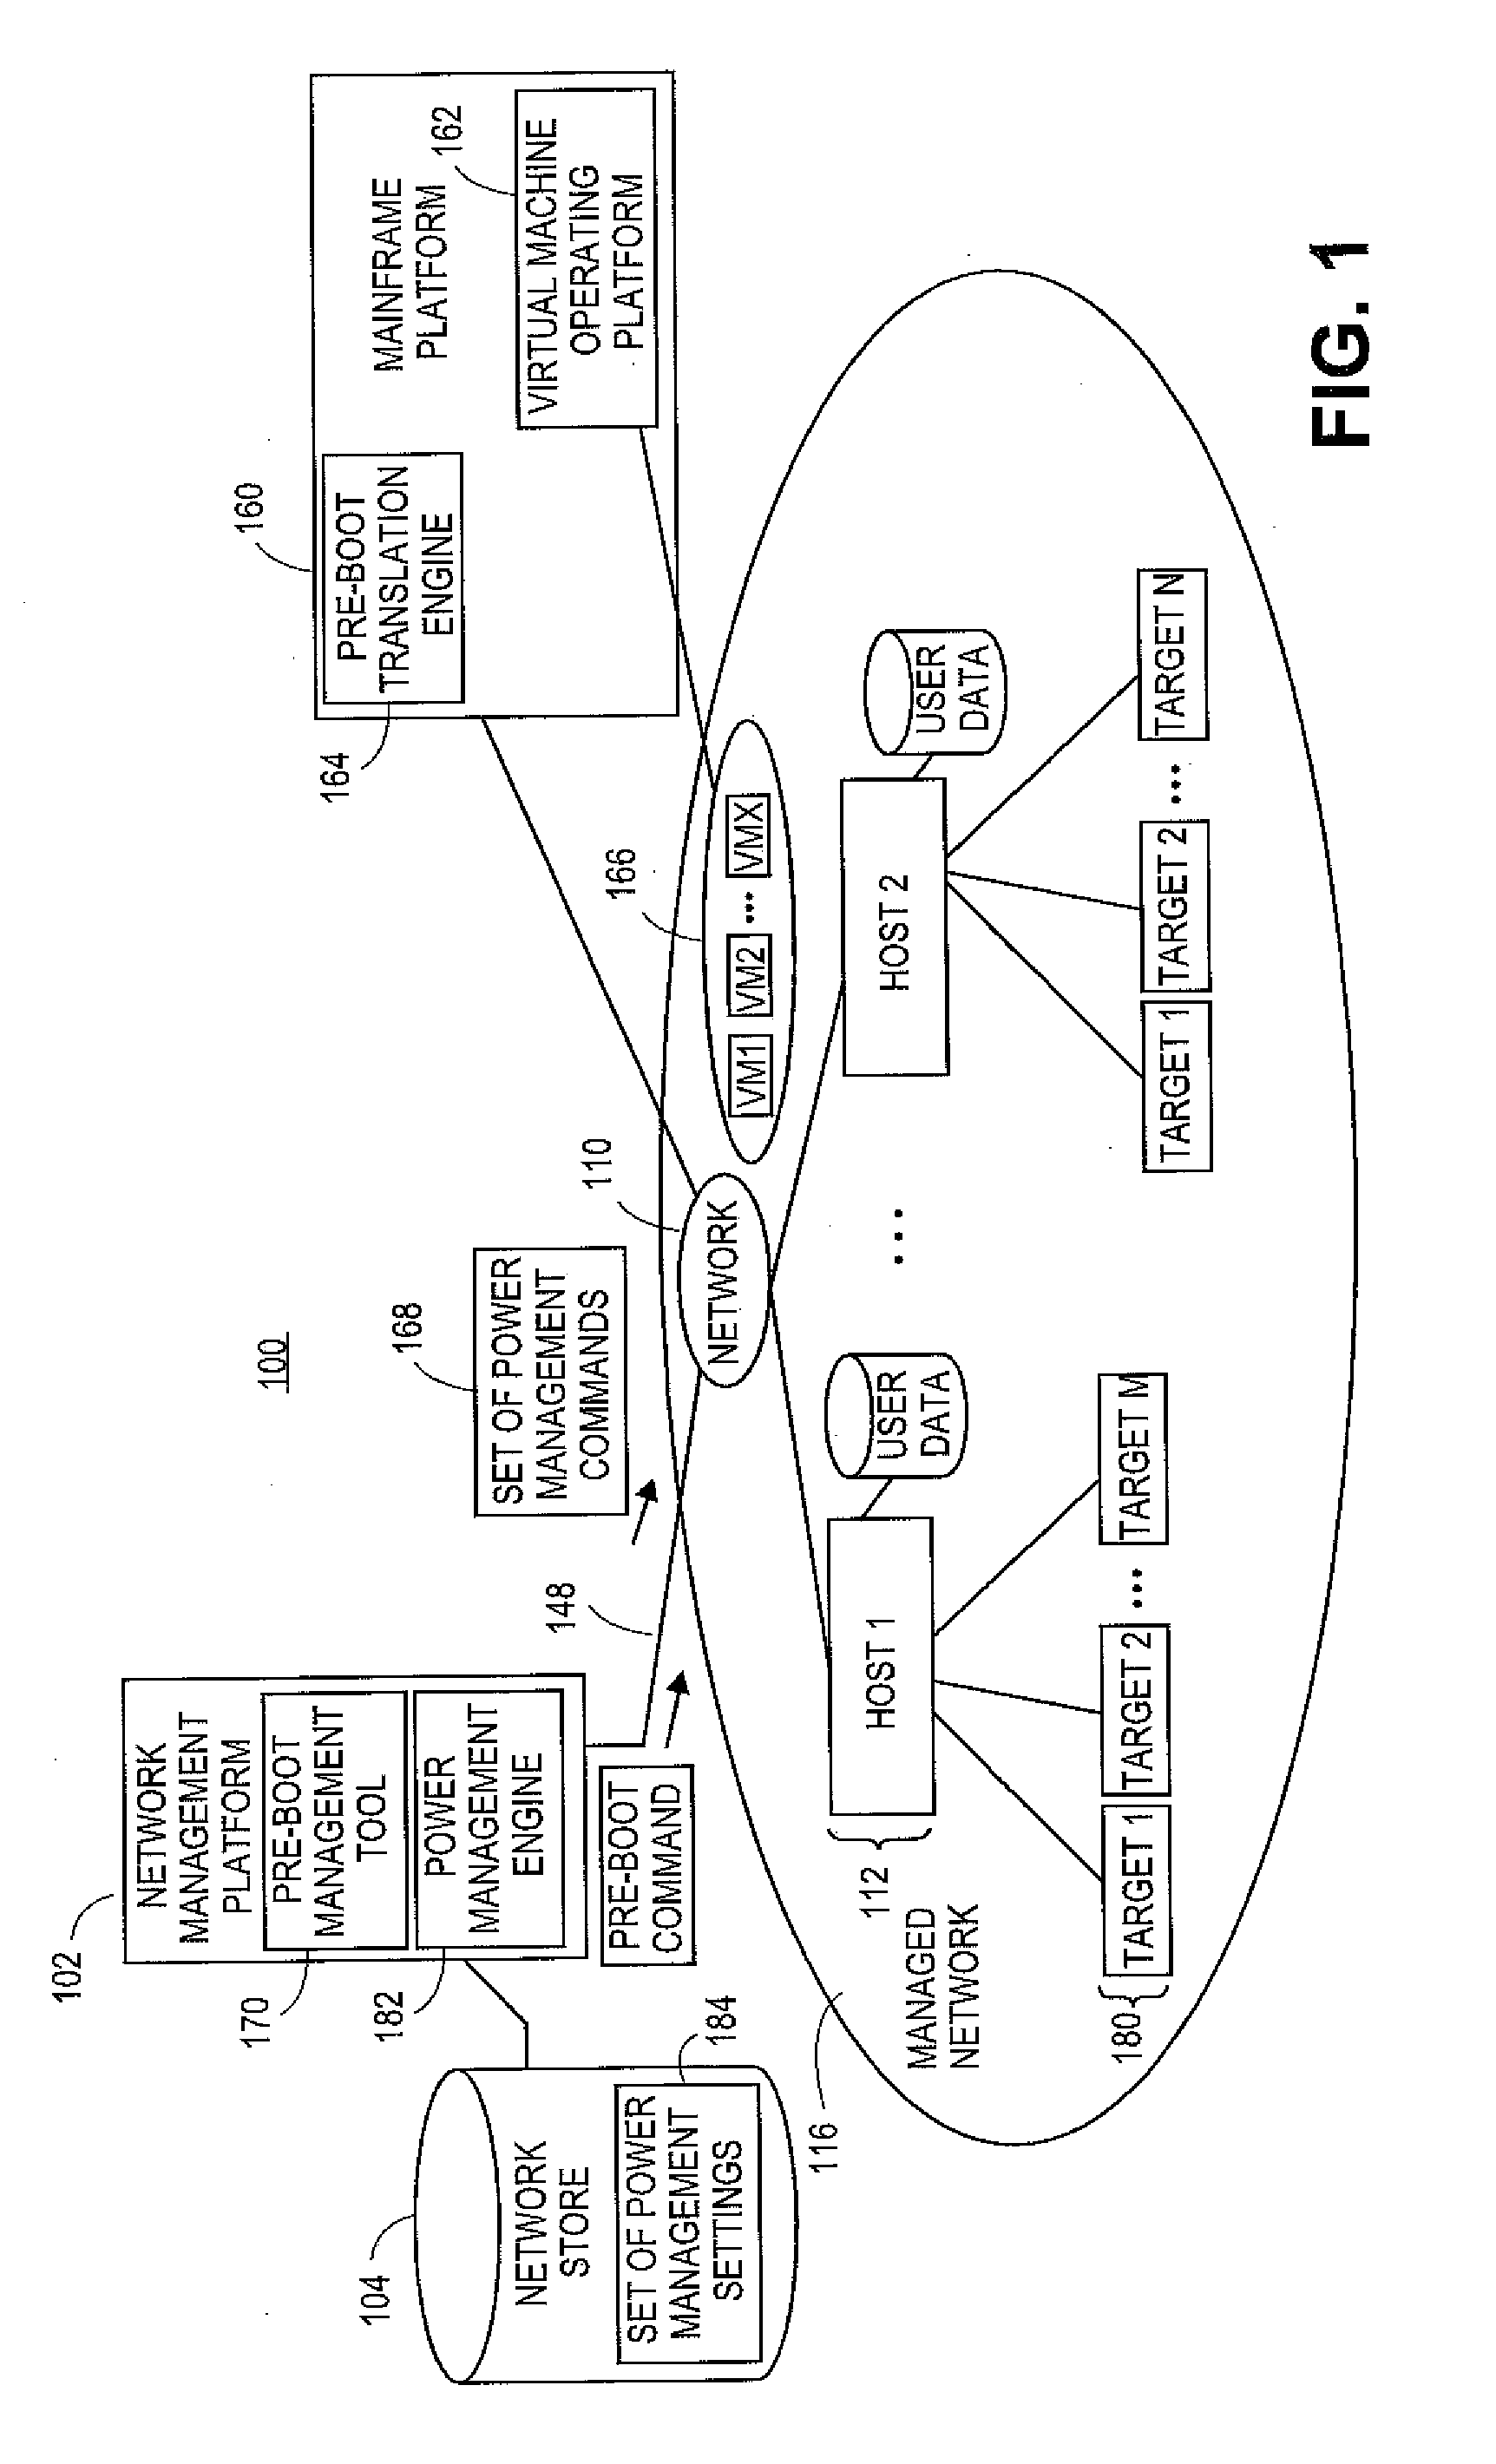 Systems and methods for power management in managed network having hardware-based and virtual resources